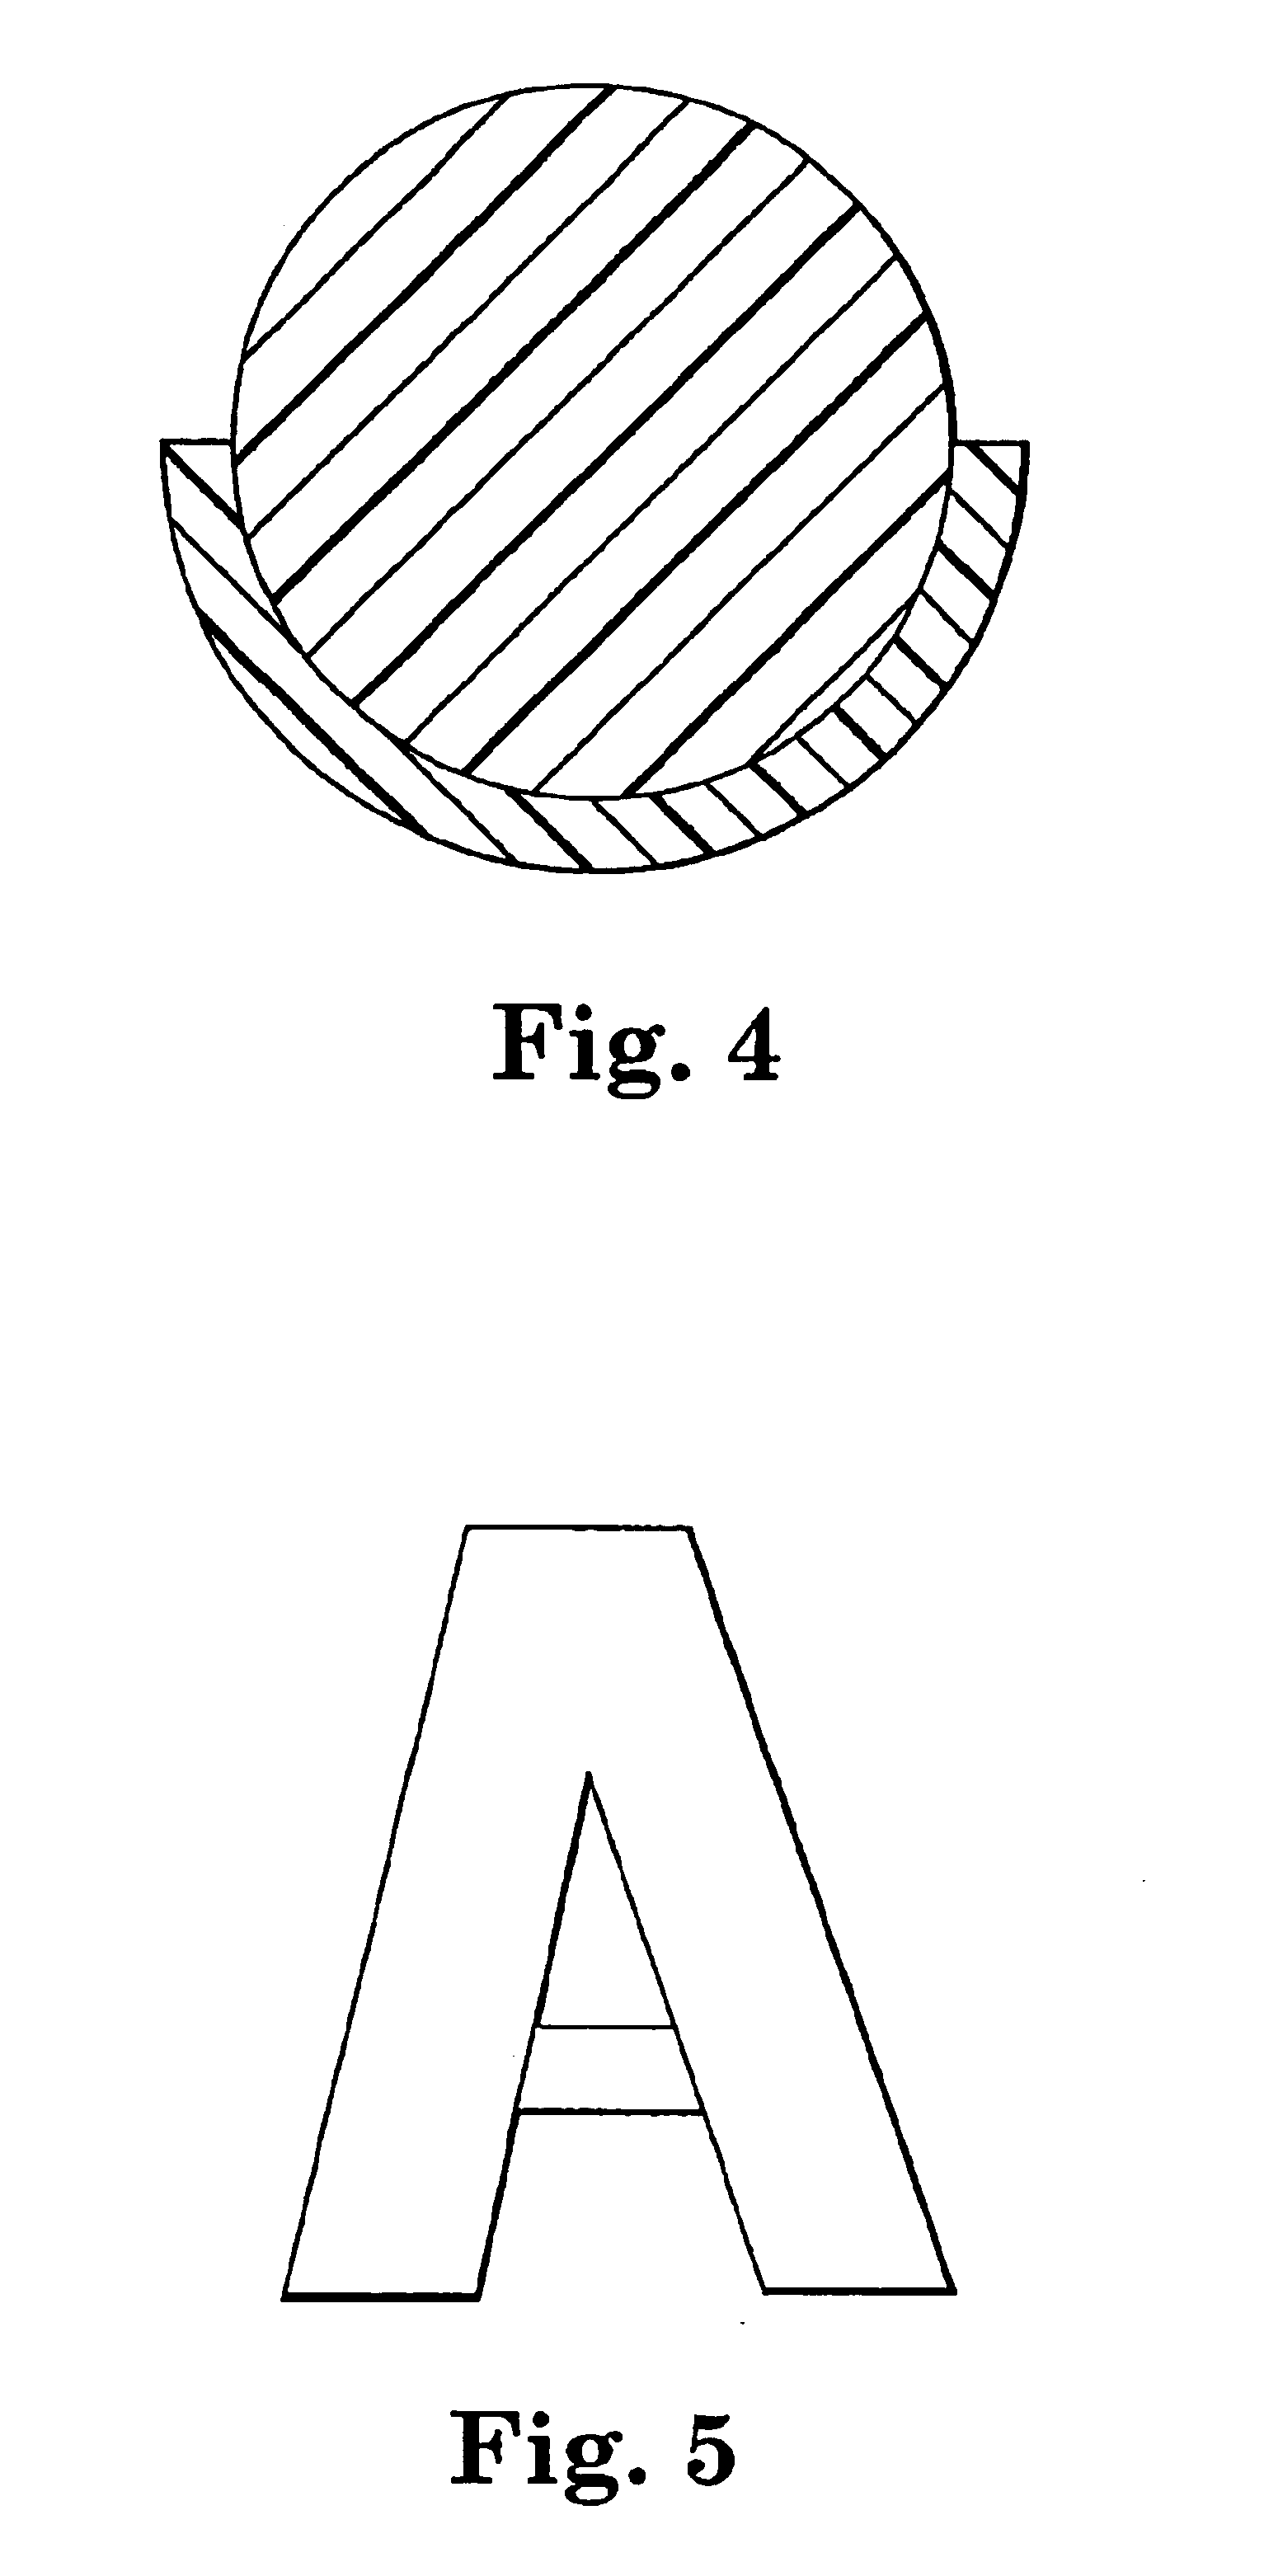 Light guide illumination device appearing uniform in brightness along its length